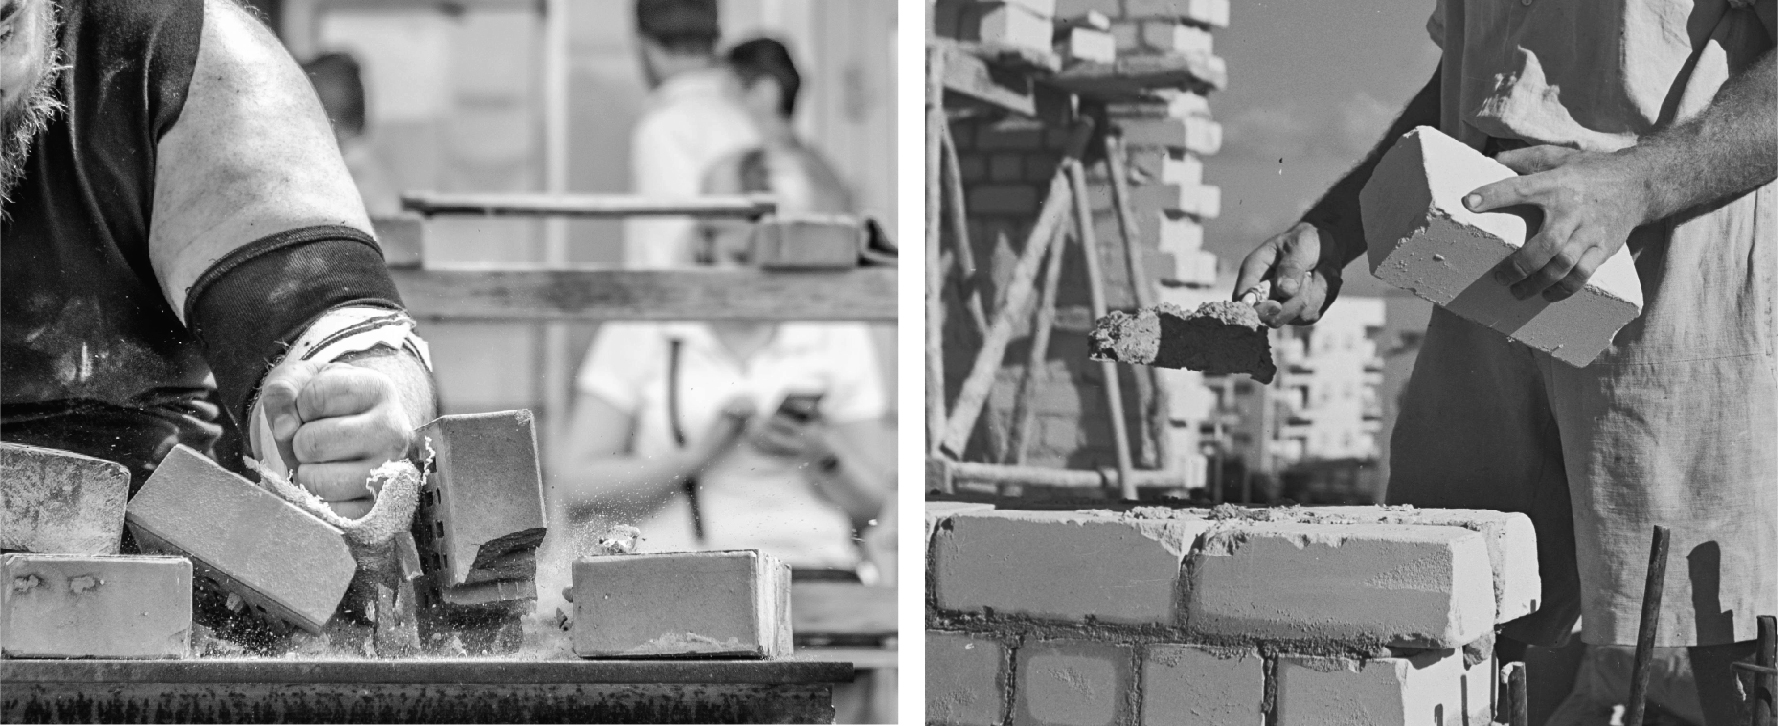 Two side-by-side photos of a worker smashing a collection of bricks (on the left) and another worker stacking them to build a wall (on the right).